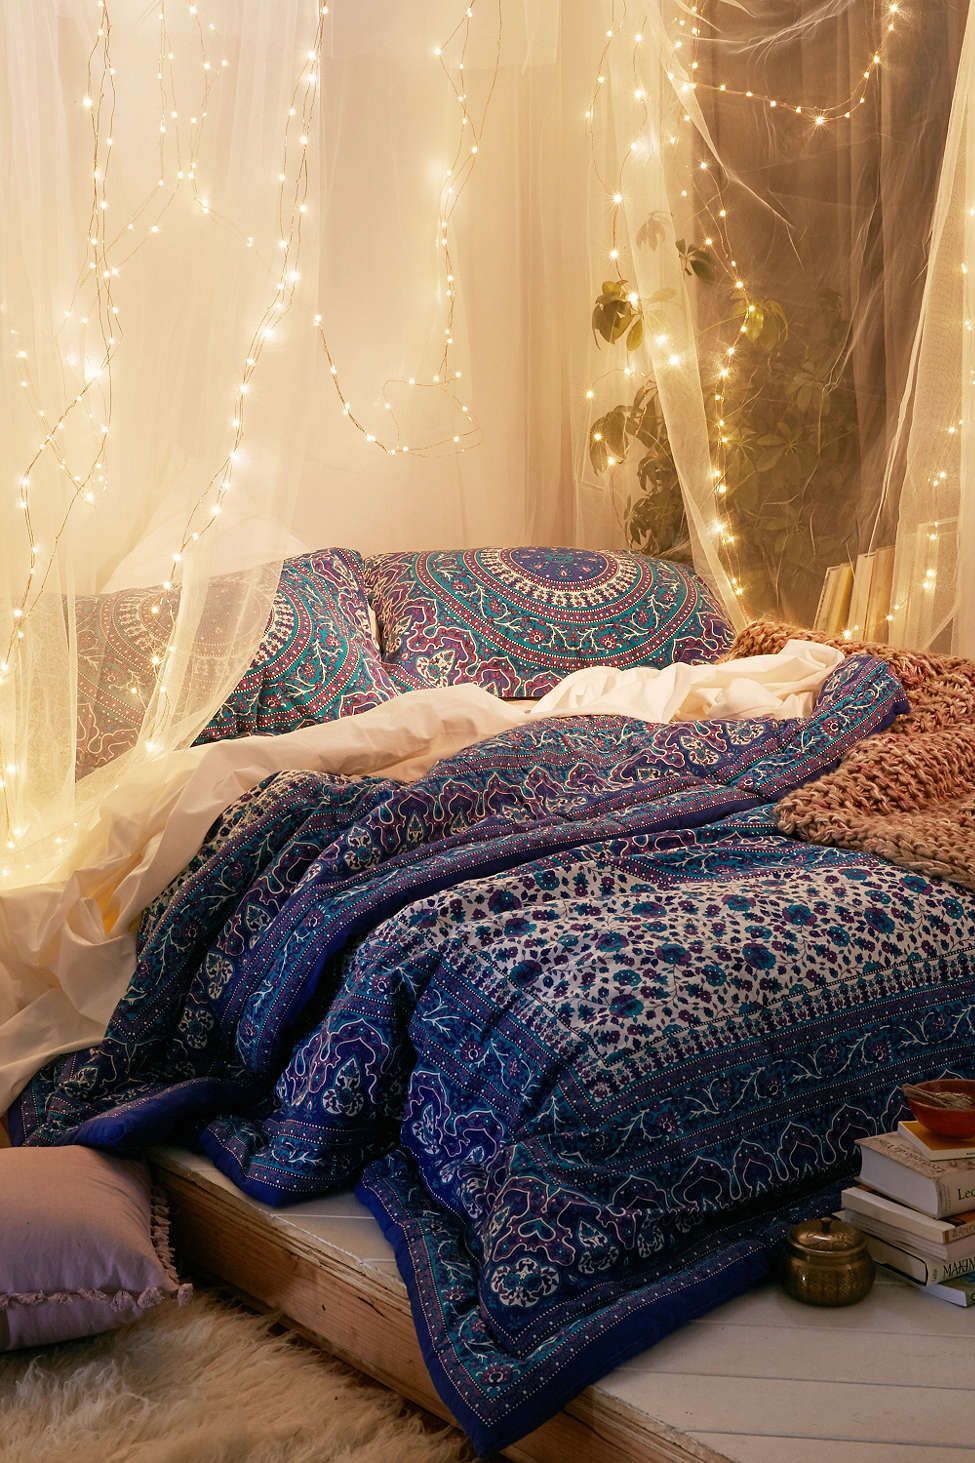 Firefly String Lights from Urban Outfitters, theres just so much potential with pretty little lights. I think the balcony would